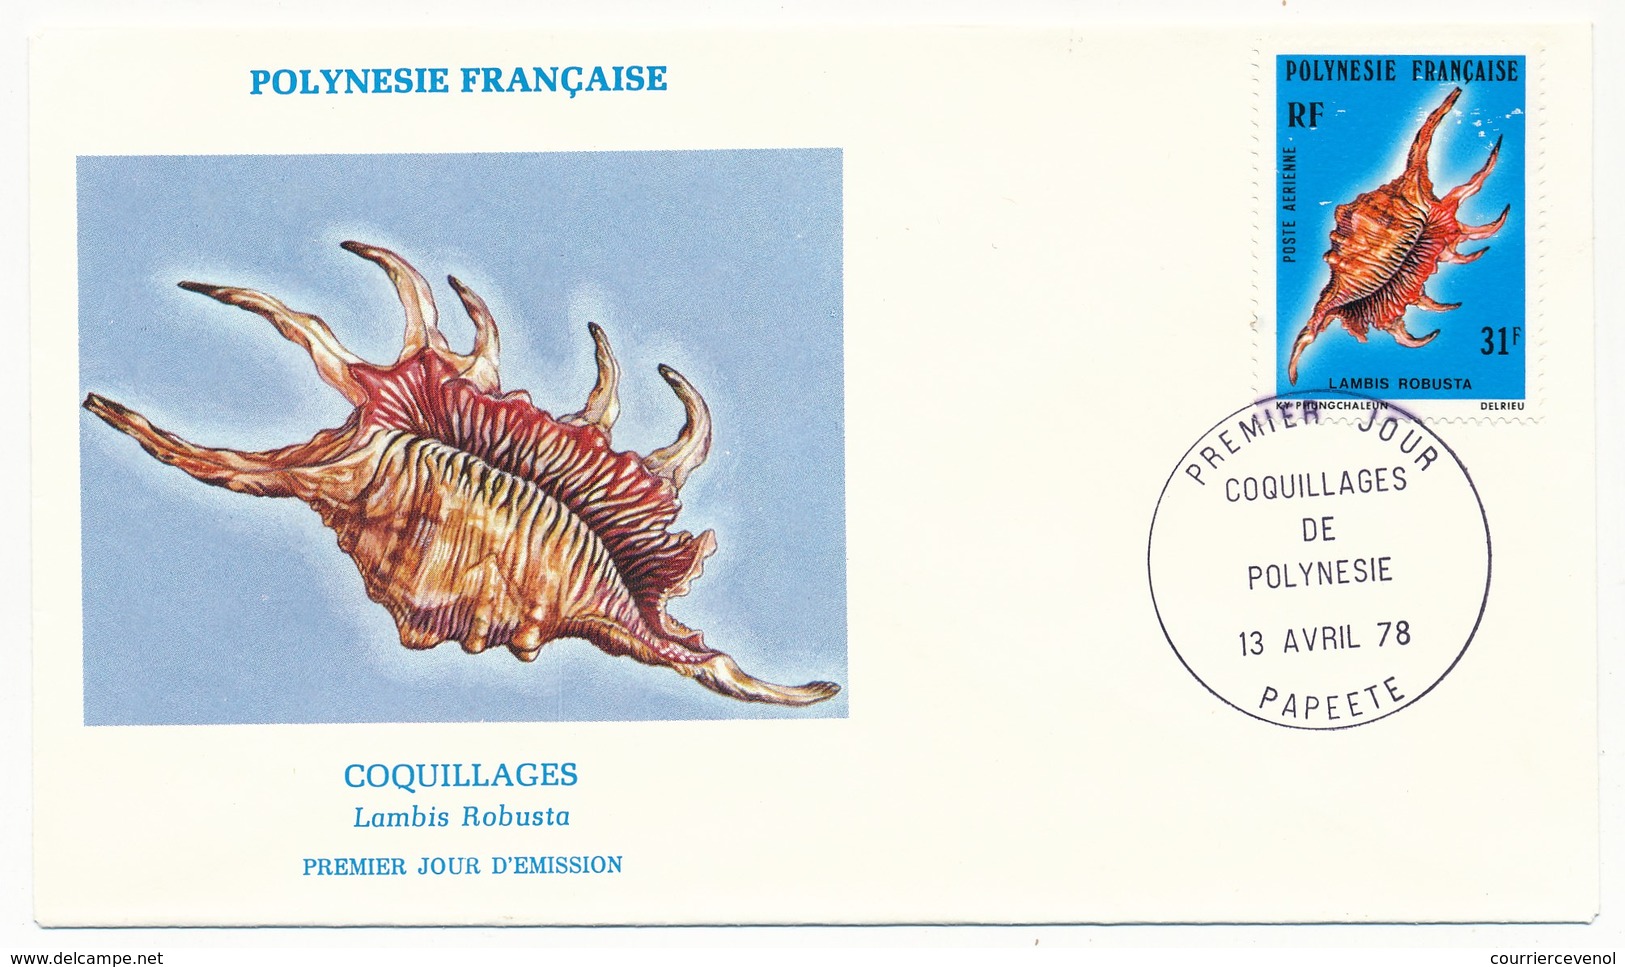 POLYNESIE FRANCAISE - 3 FDC - Coquillages De Polynésie - 13 Avril 1978 - PAPEETE - FDC